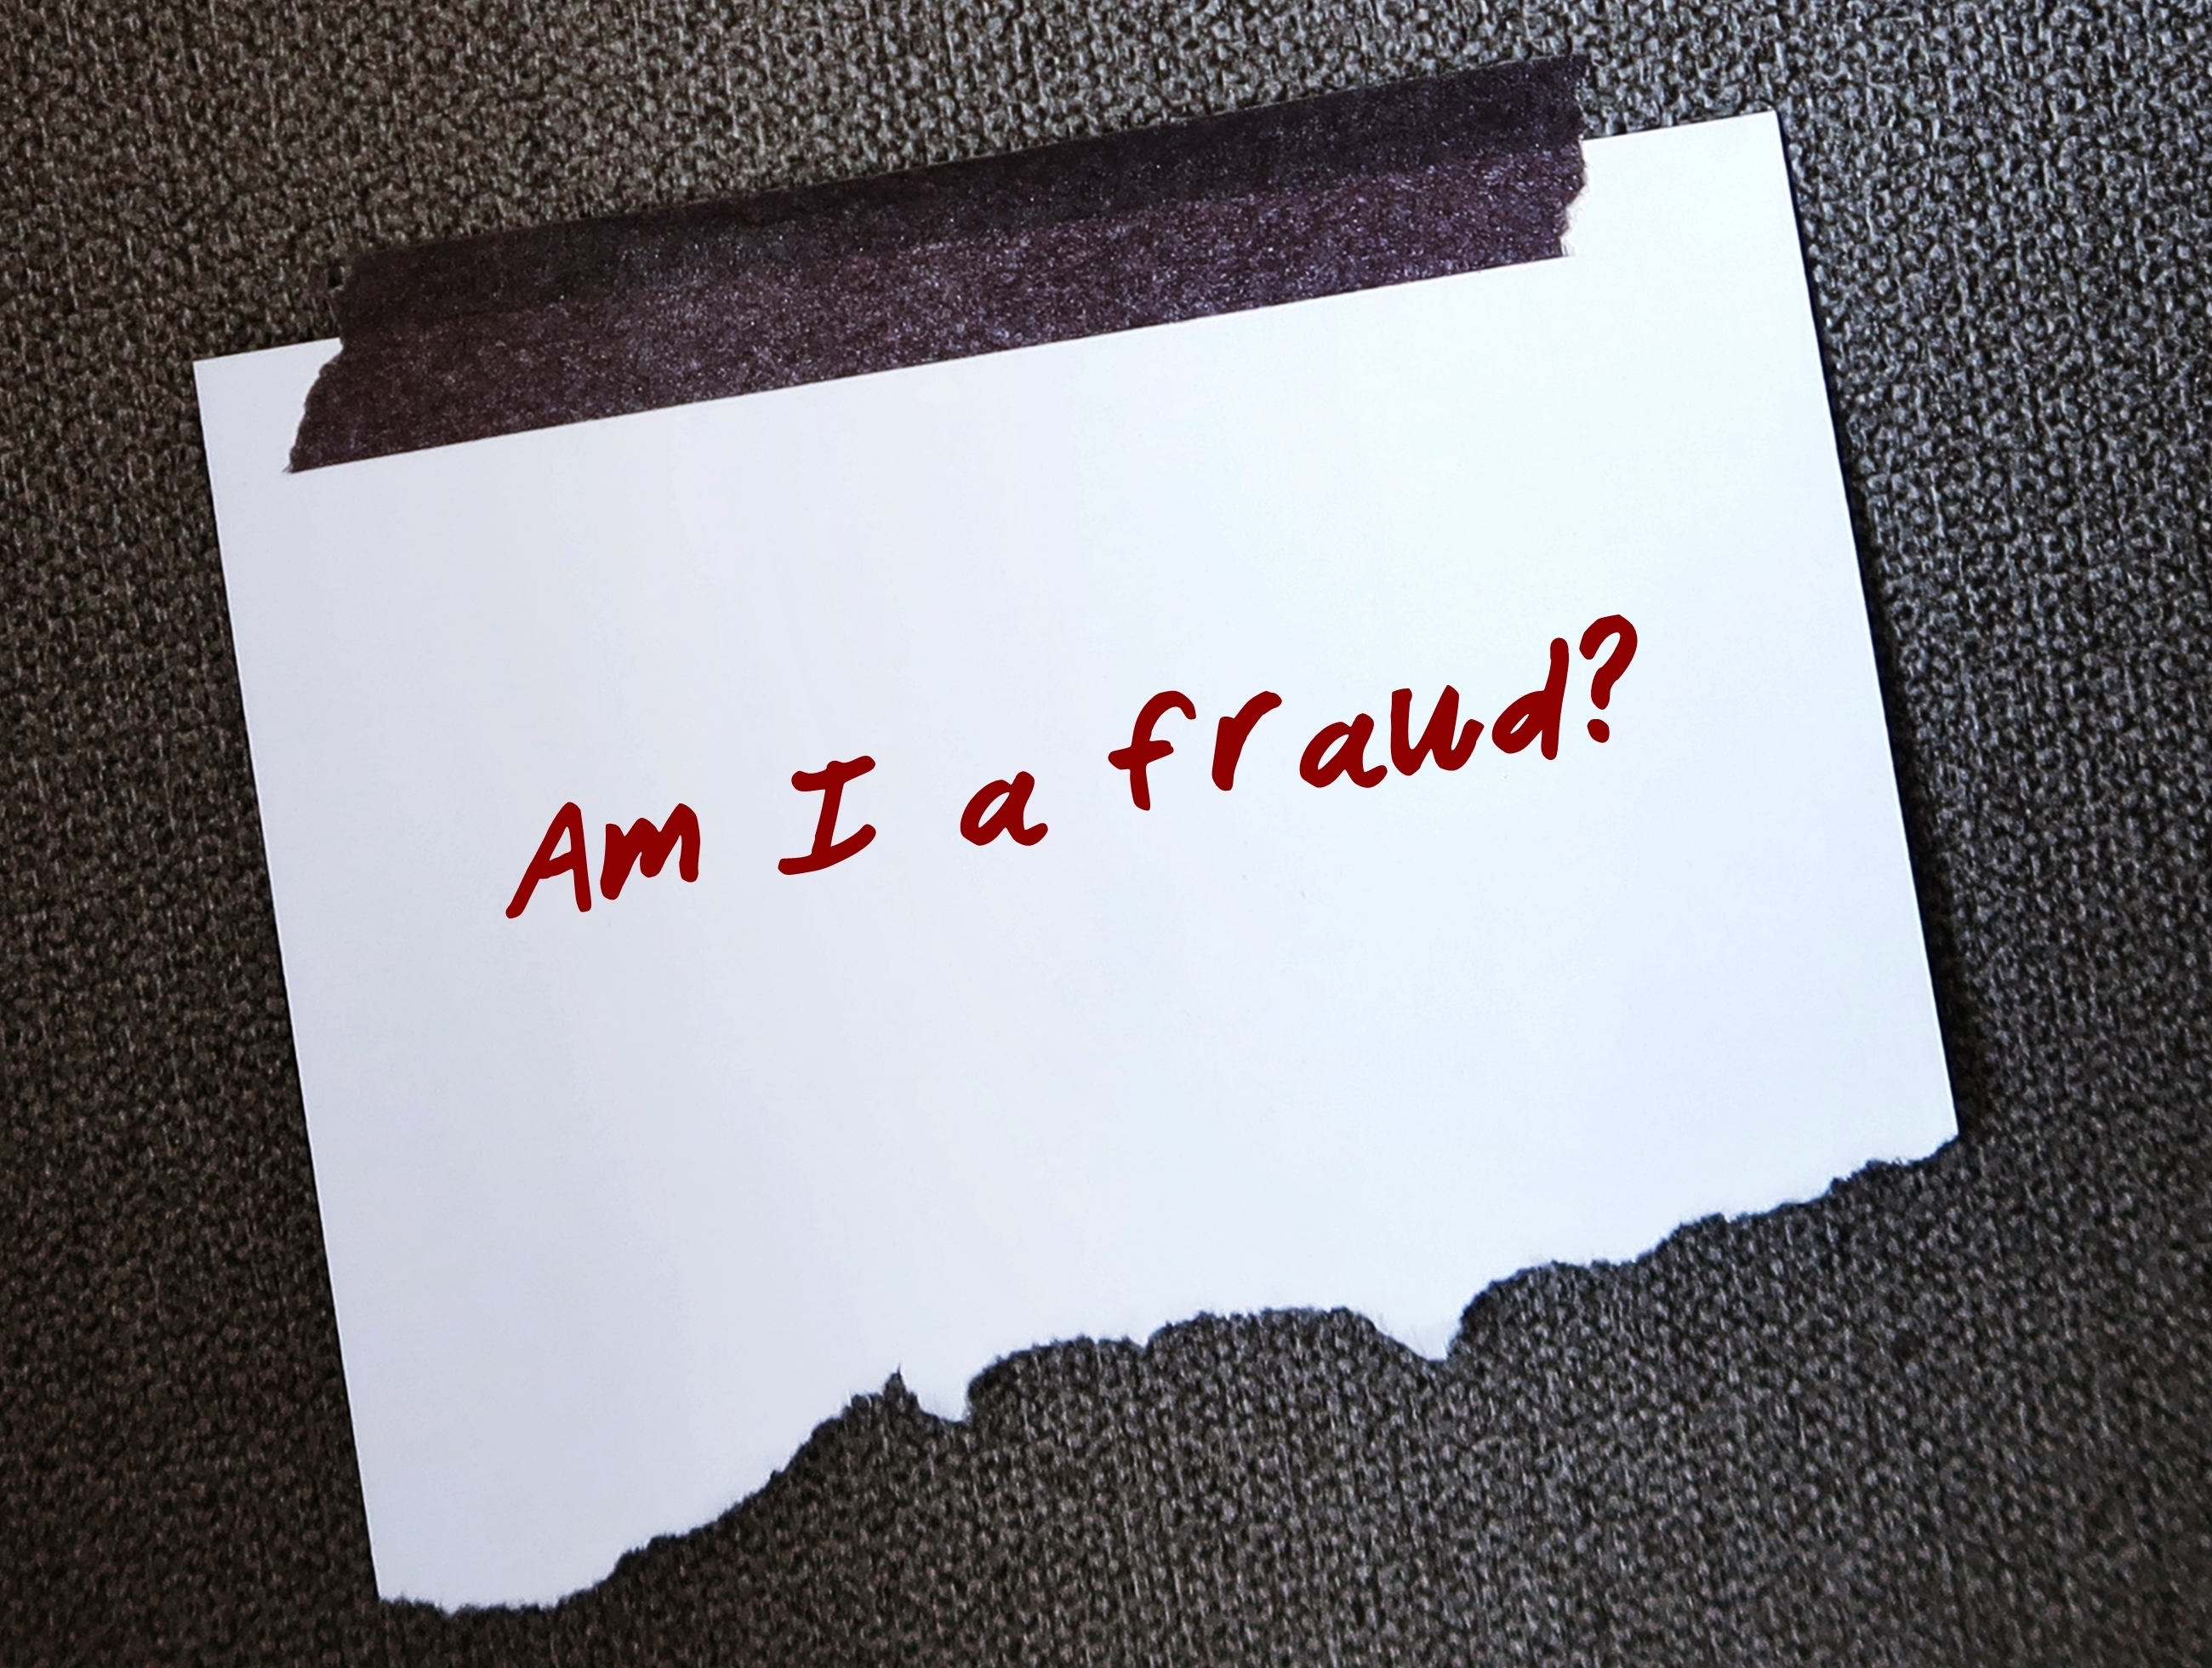 White piece of paper with 'Am I a Fraud?' written on it in red